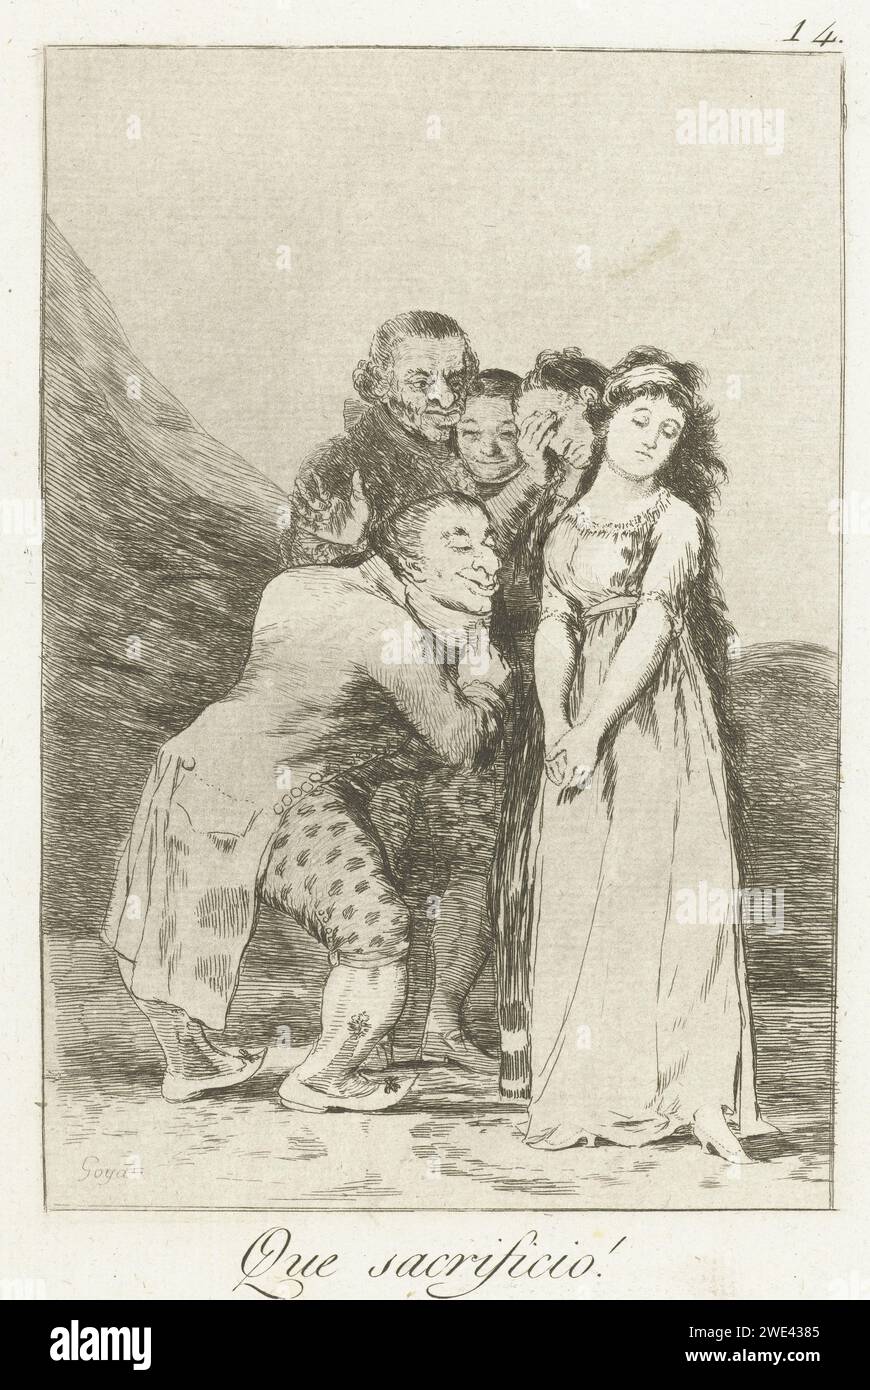 What a sacrifice!, Francisco de Goya, 1797 - 1799 print An ugly man with crooked legs, peeping at his fiancé, a young girl. Behind them are her father and mother and a third person. Fourteenth print from the Los Caprichos series. Spain paper etching / drypoint unequal partners Stock Photo